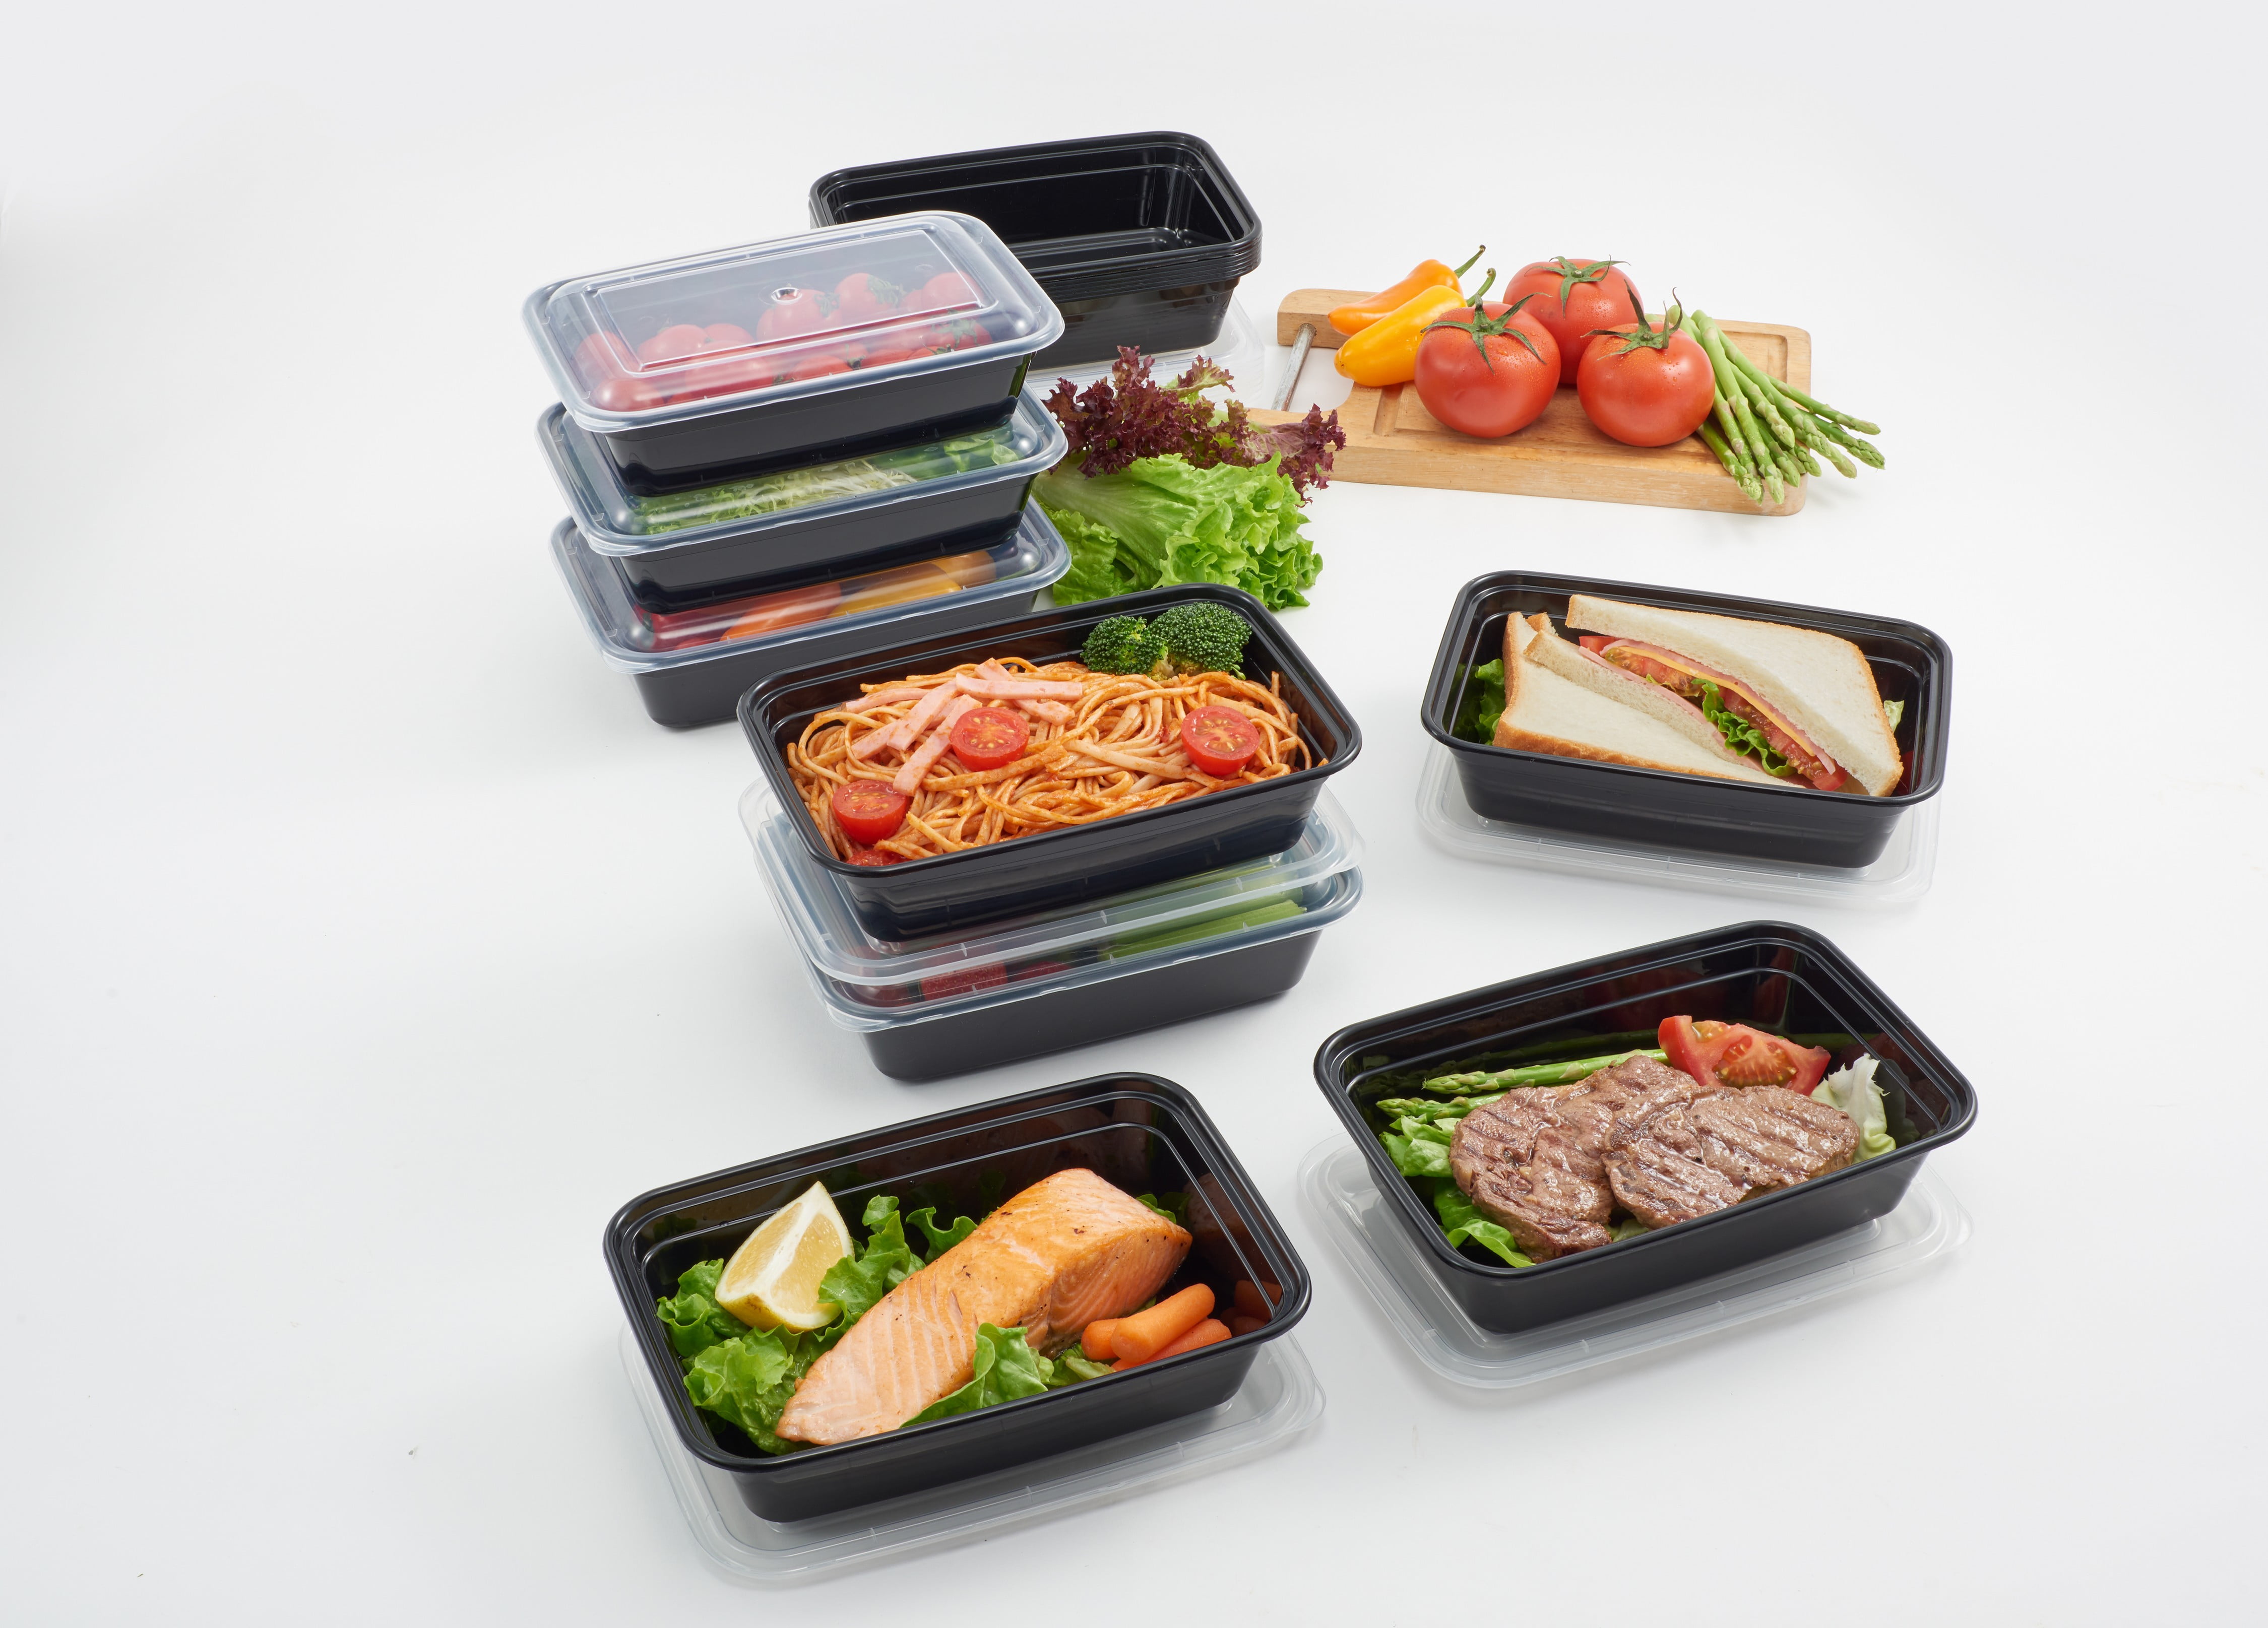 15 x Meal Prep Food Containers Microwavable BPA Free Reusable Plastic Lunch Box 